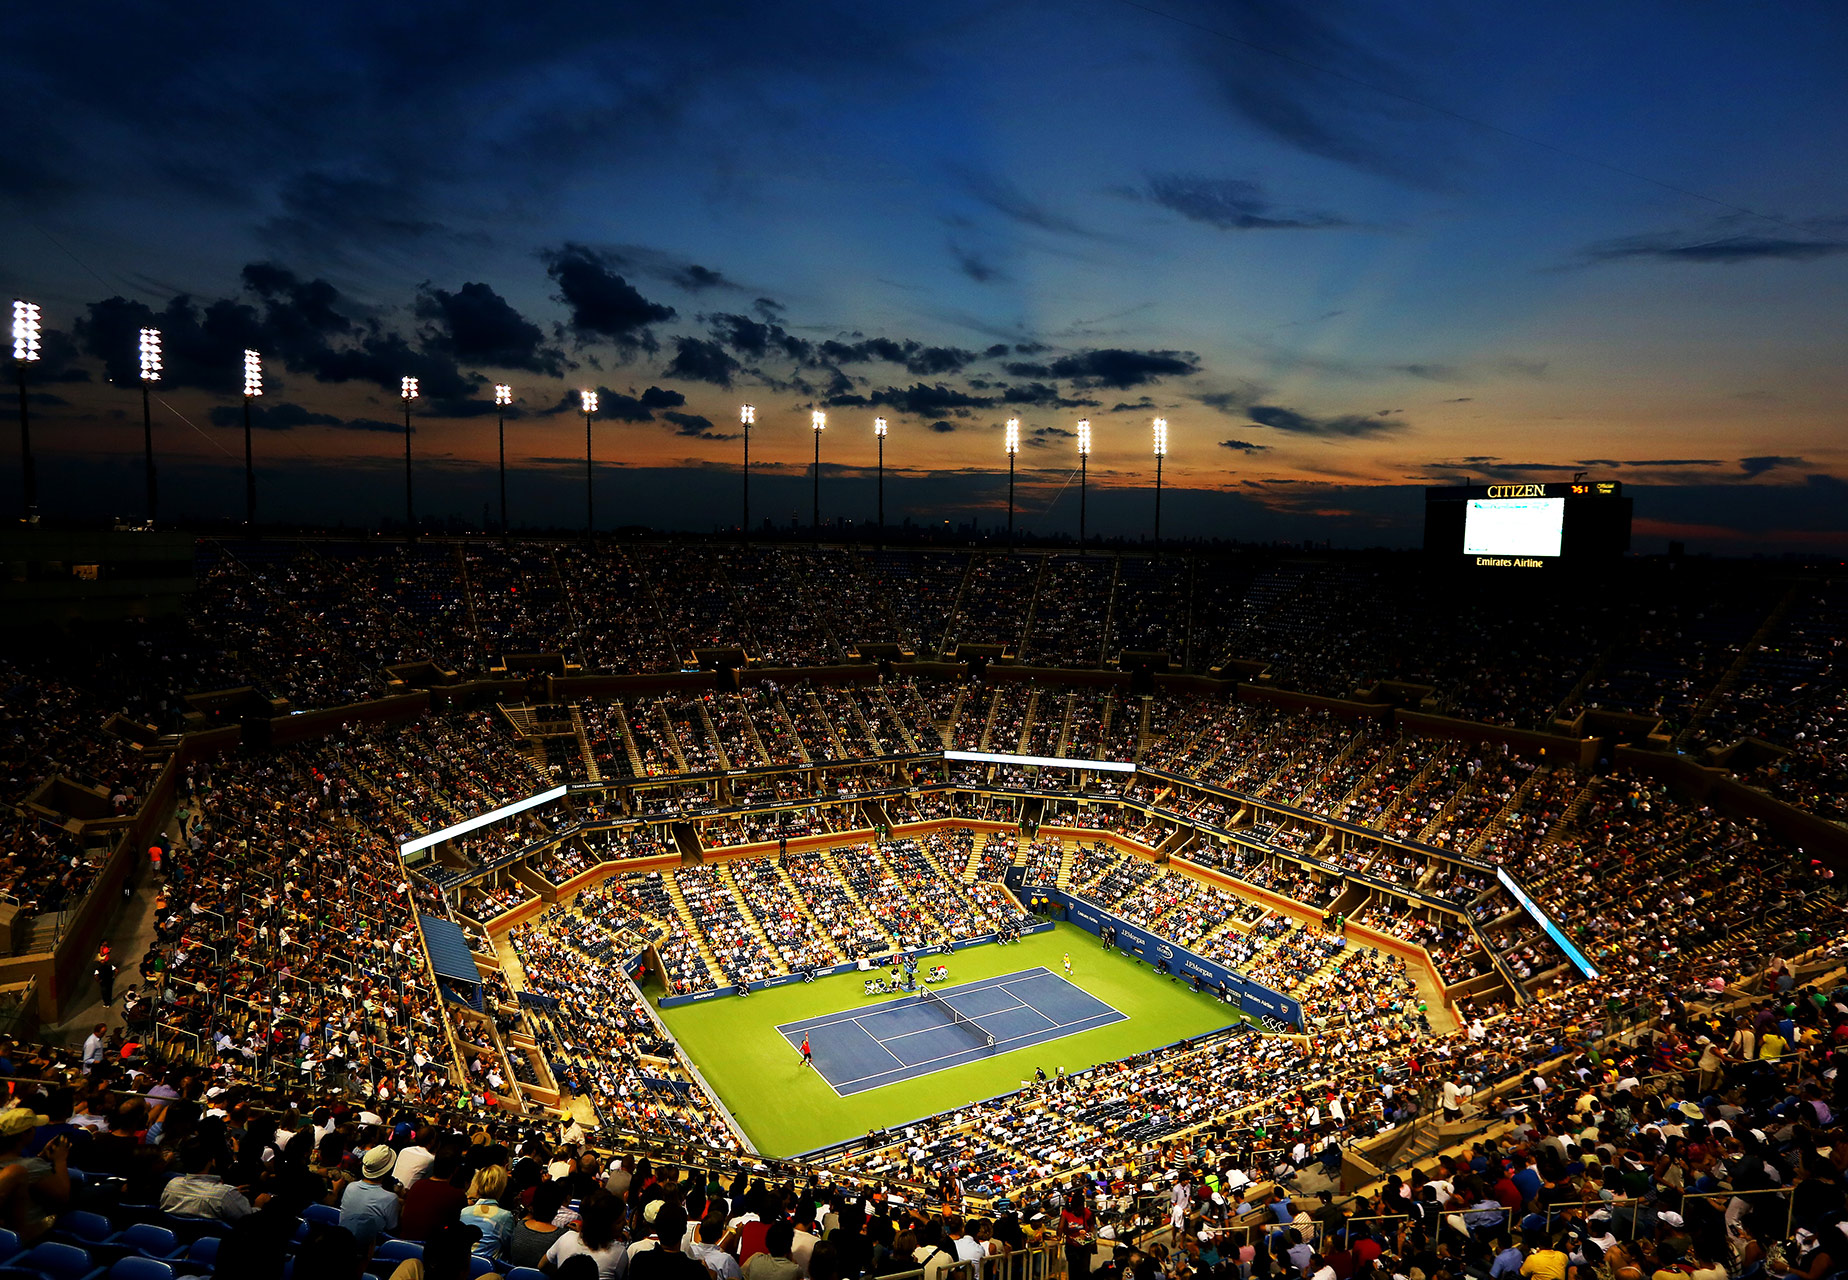 US Open-US Open Tennis Championship: Session 16 - Men's/Women's Round of 16 tickets price and order